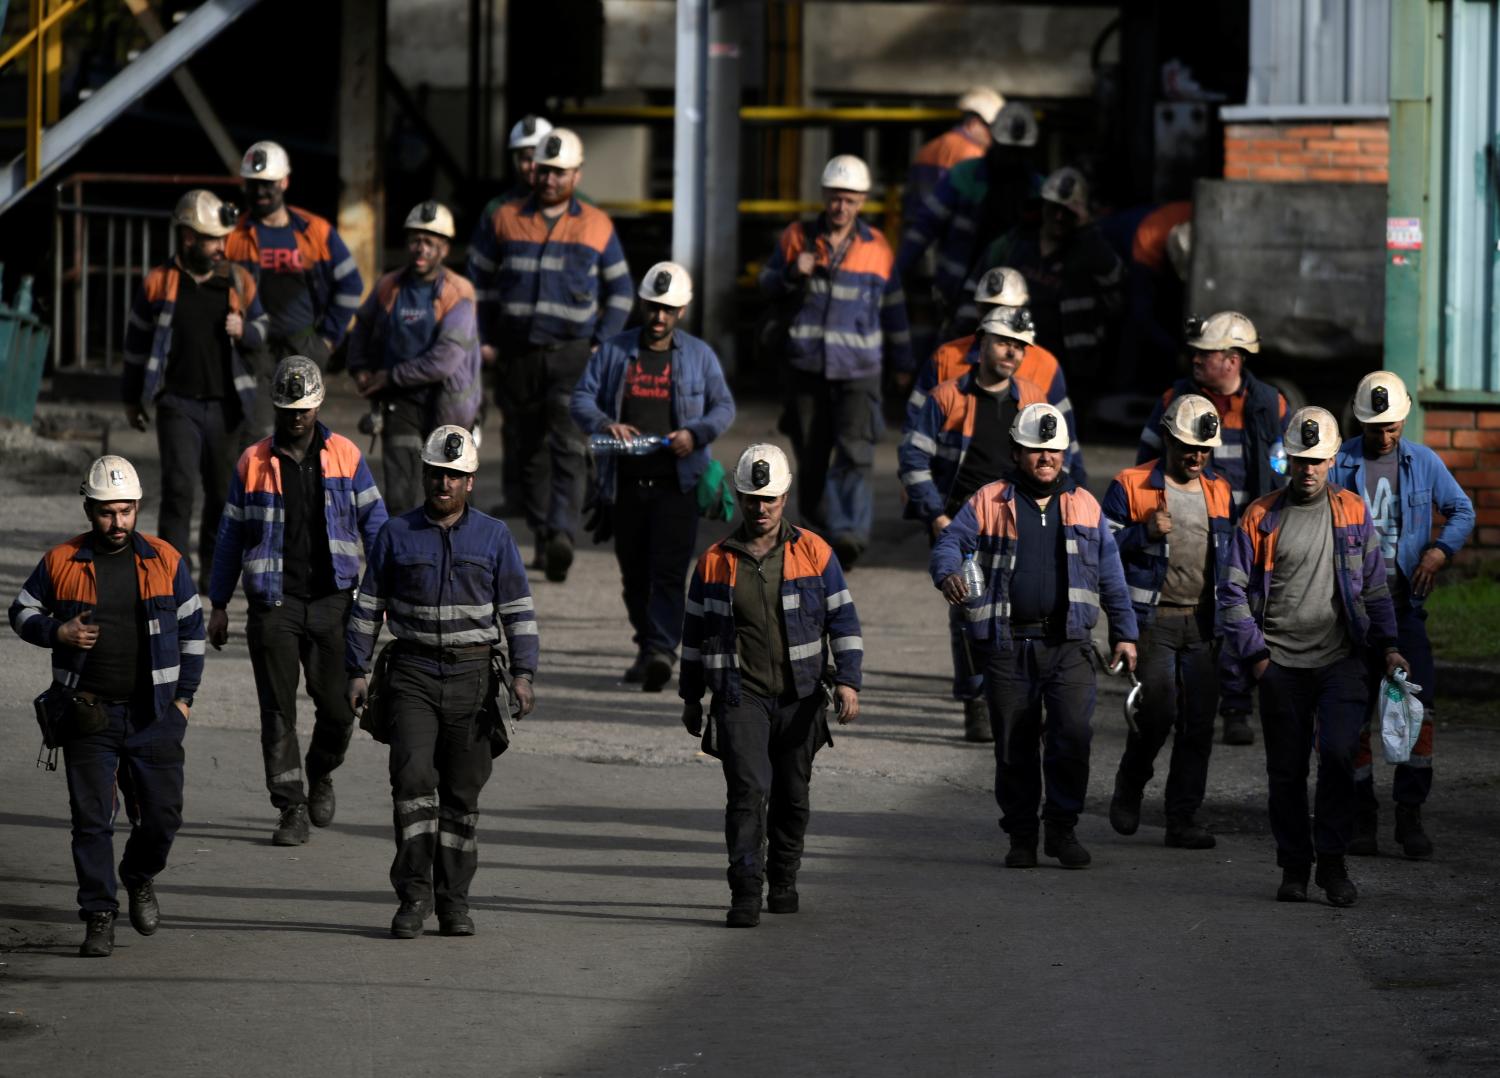 Coal miners leave the mine Pozo Santiago after finishing their shift, in Caborana, Spain, December 26, 2018. Picture taken December 26, 2018. REUTERS/Eloy Alonso - RC1F19664270